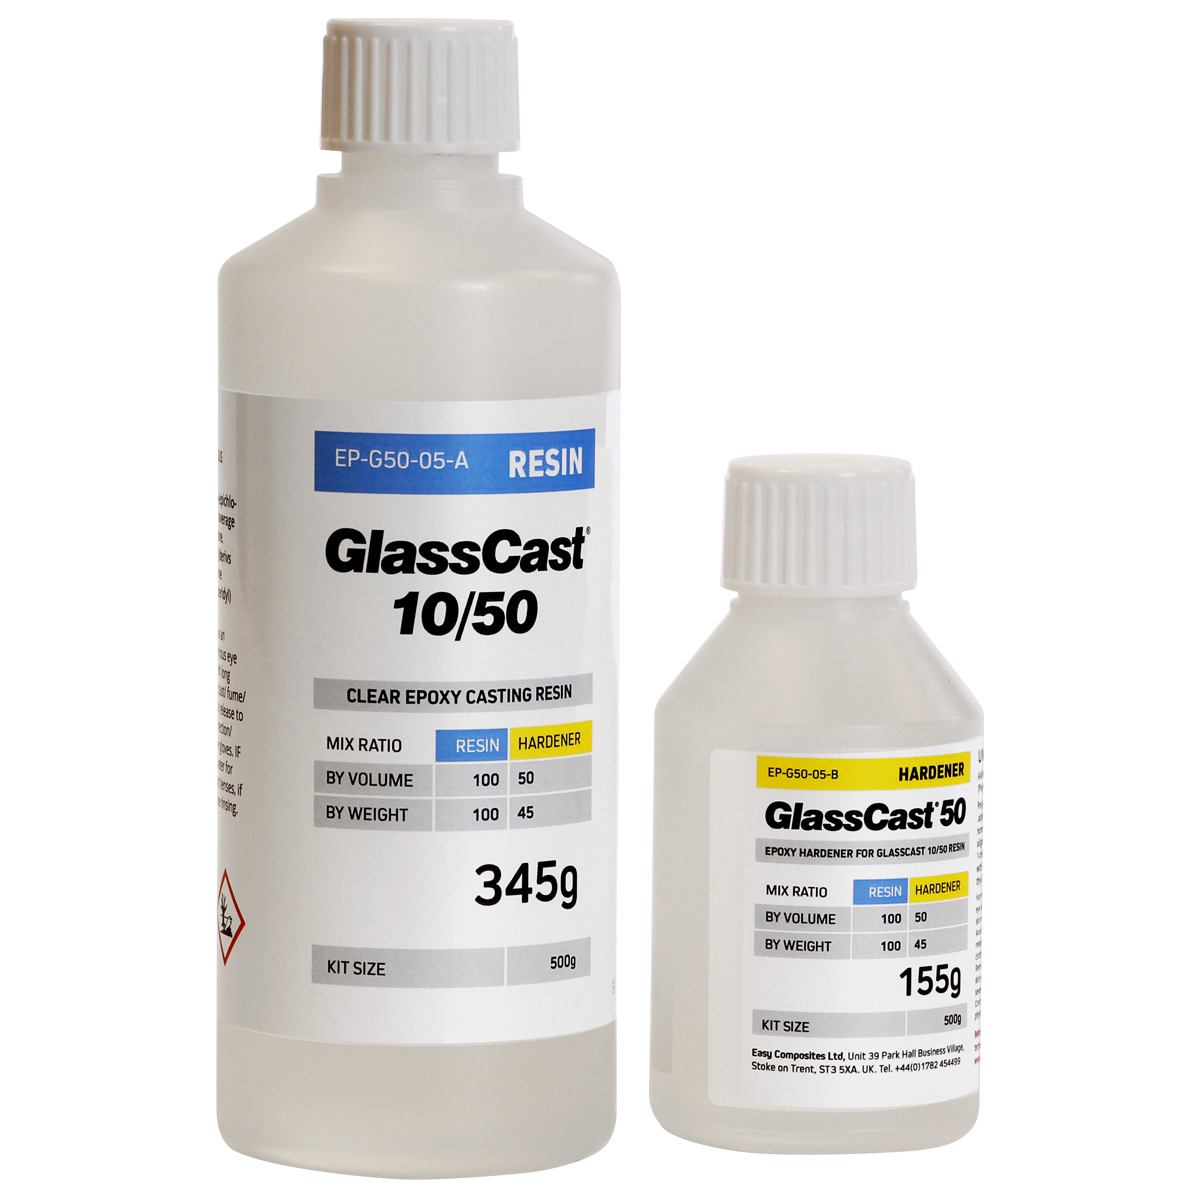 GlassCast 50 Resin for River Tables and 